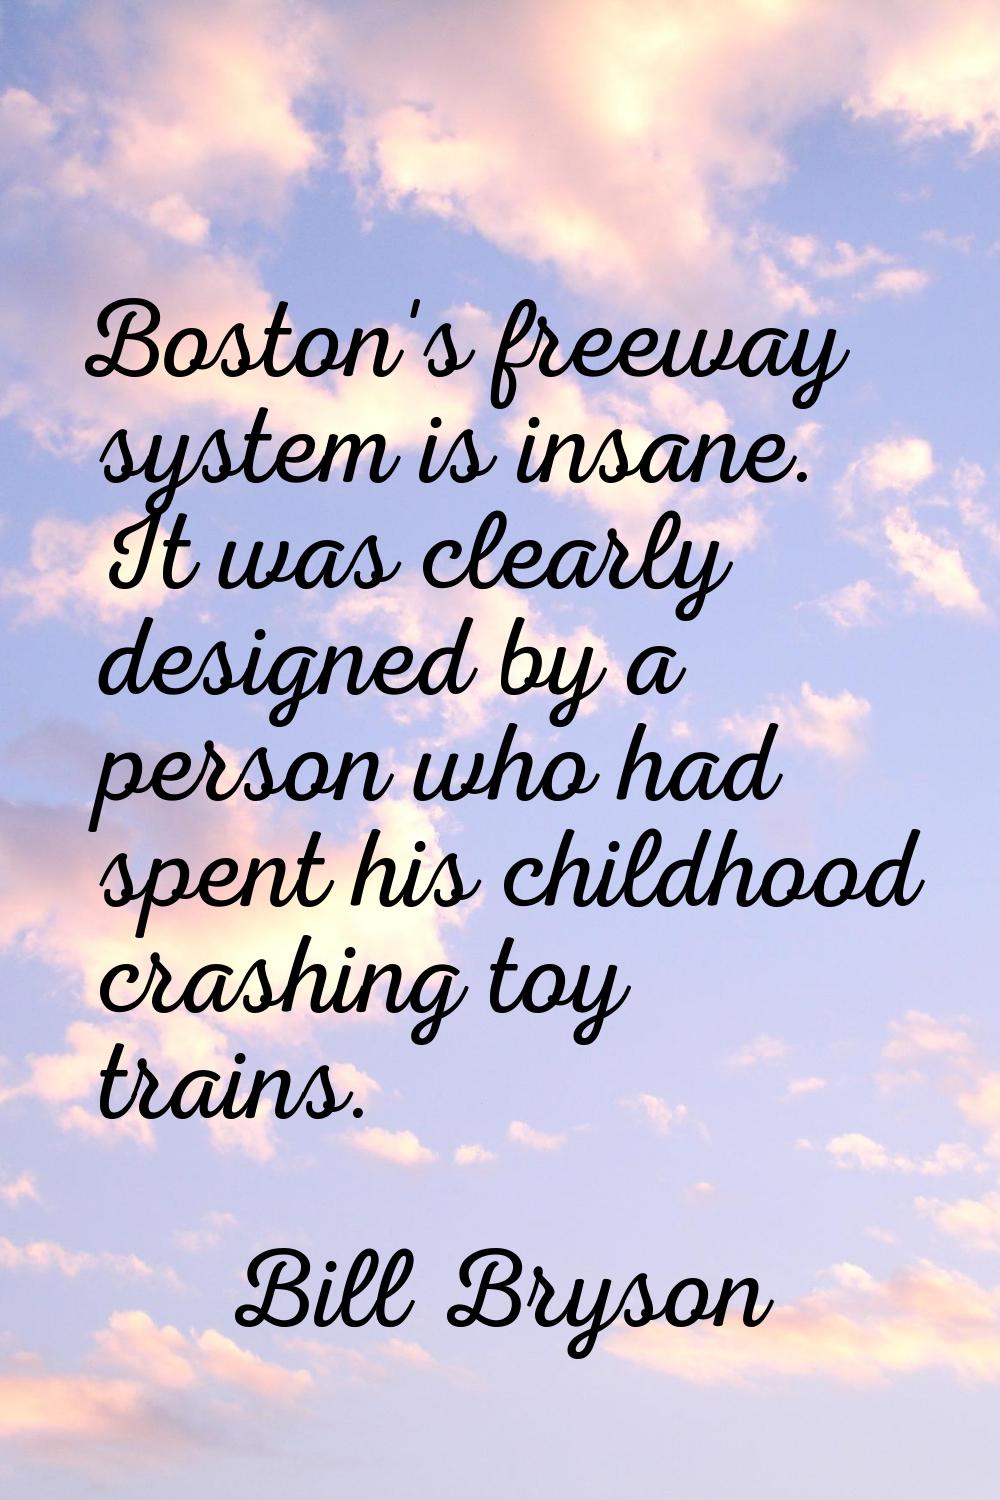 Boston's freeway system is insane. It was clearly designed by a person who had spent his childhood 